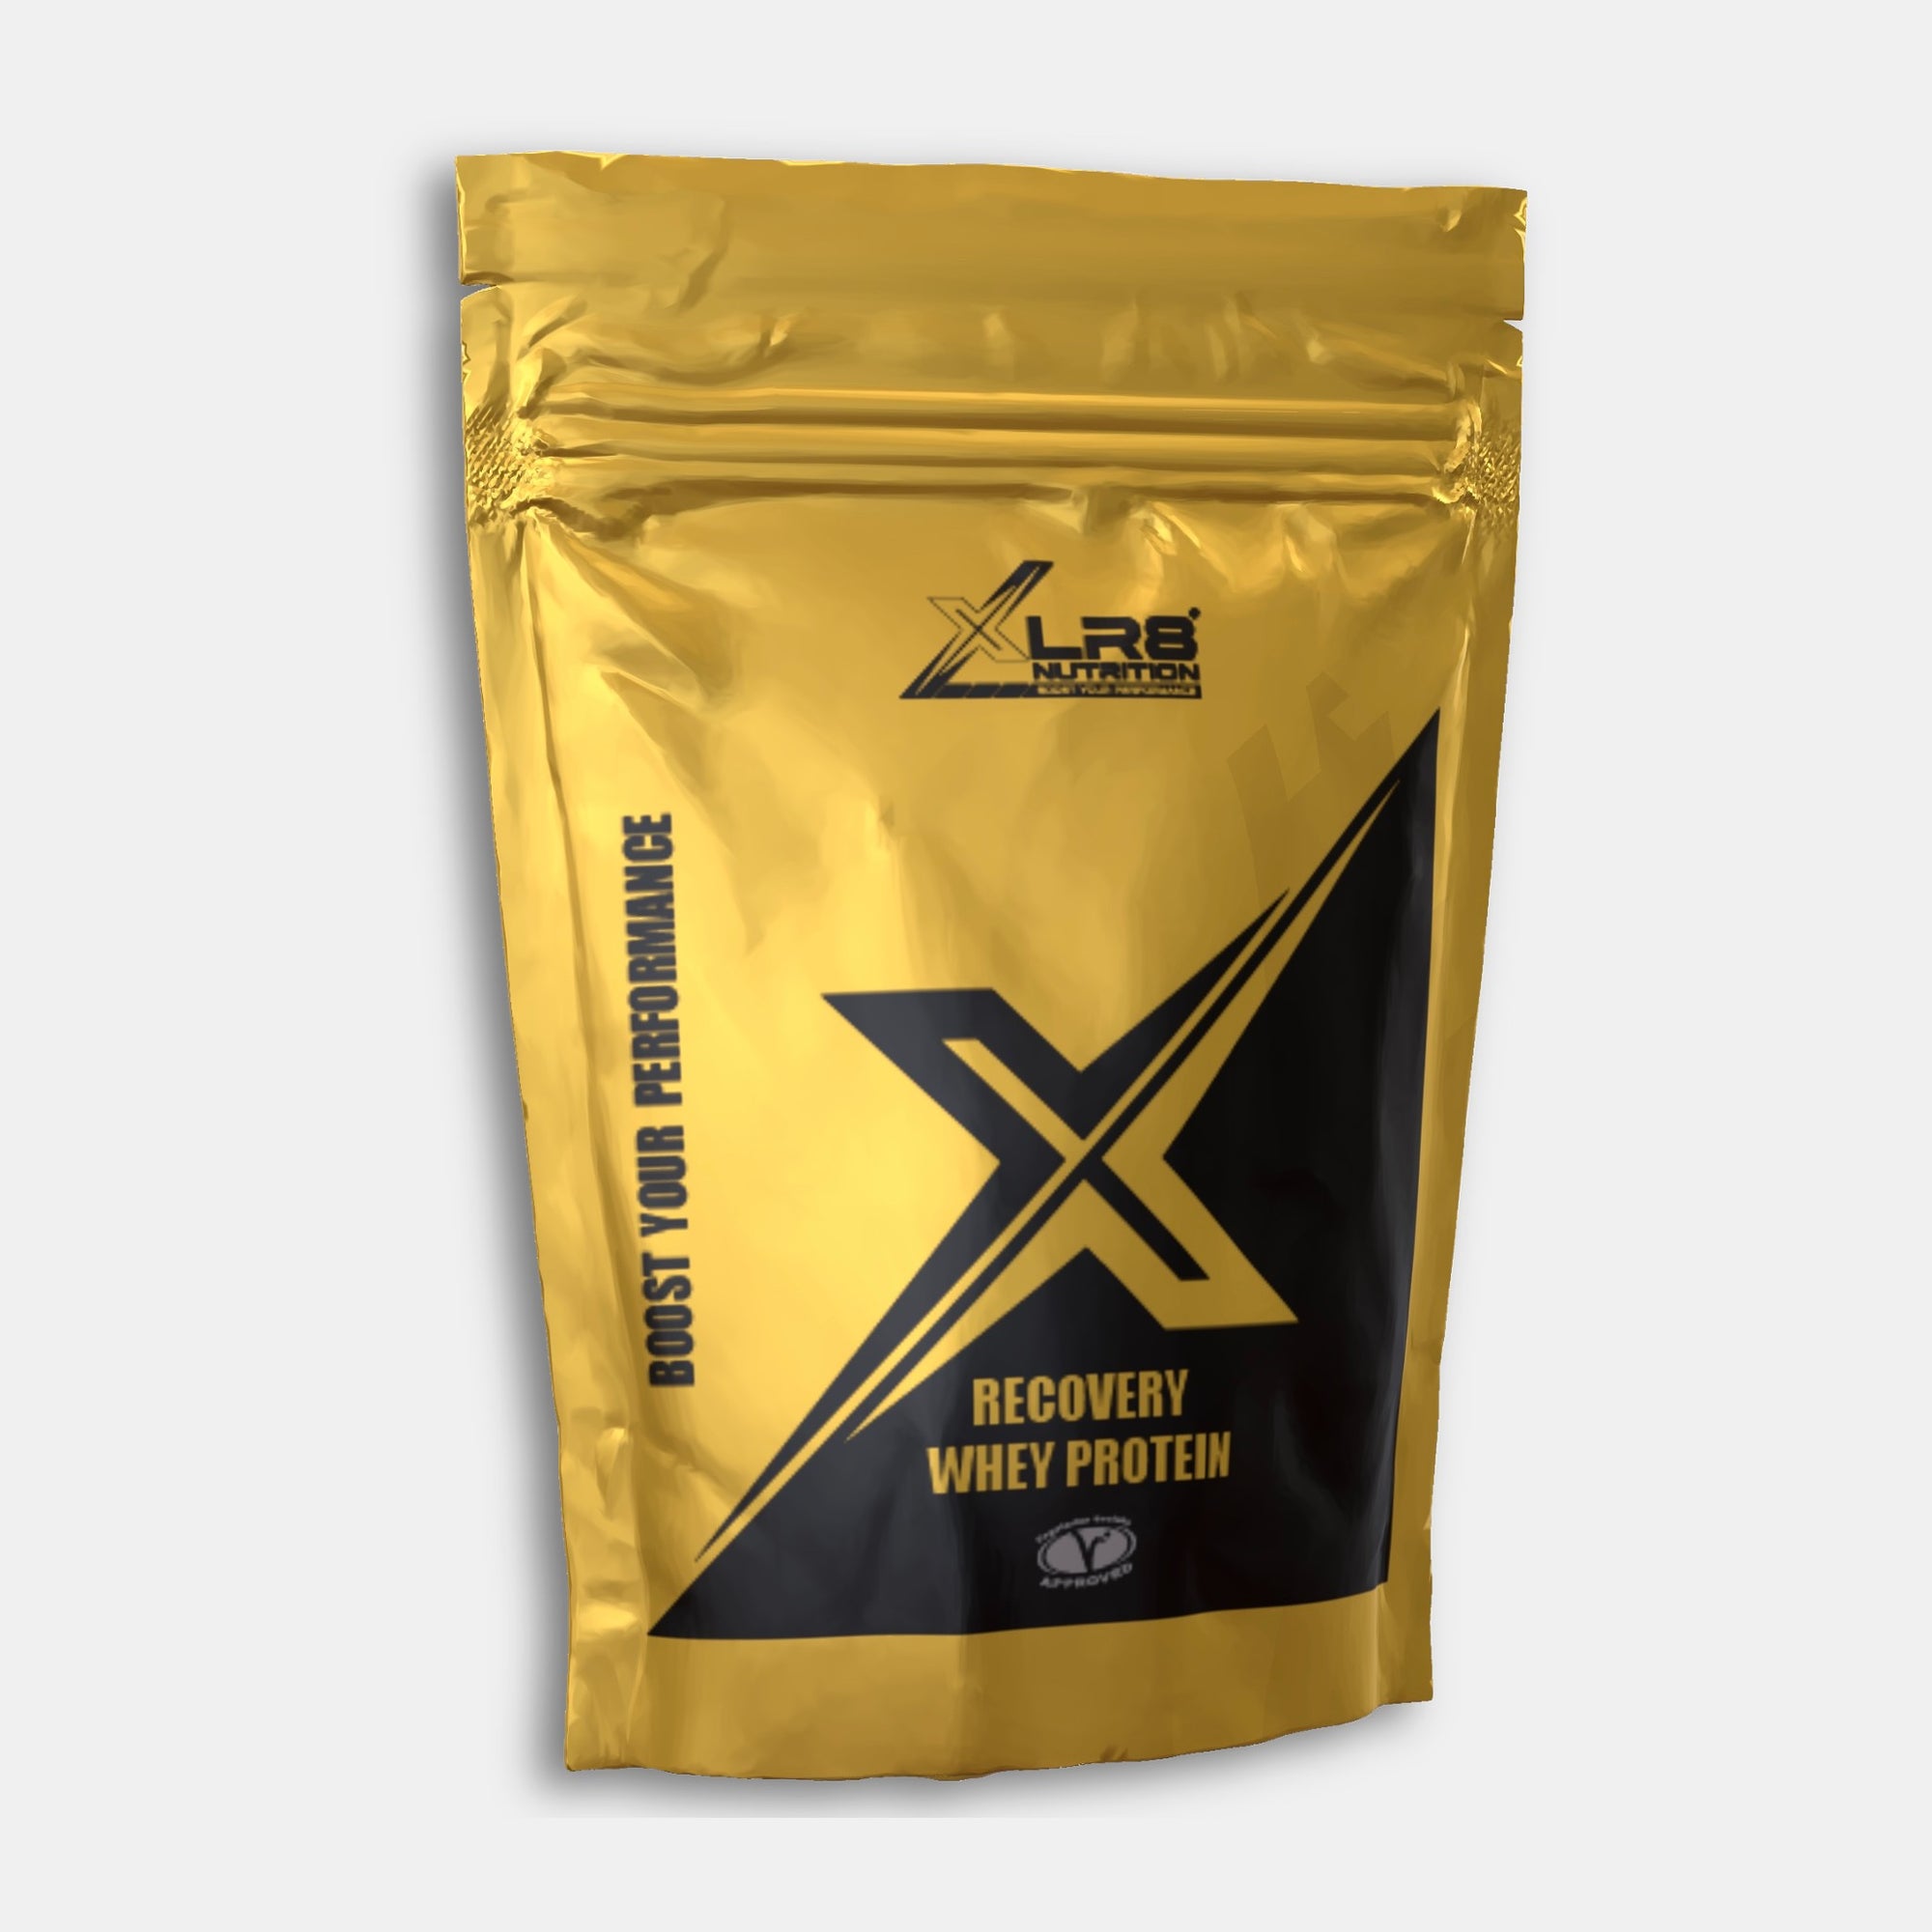 RECOVERY WHEY PROTEIN